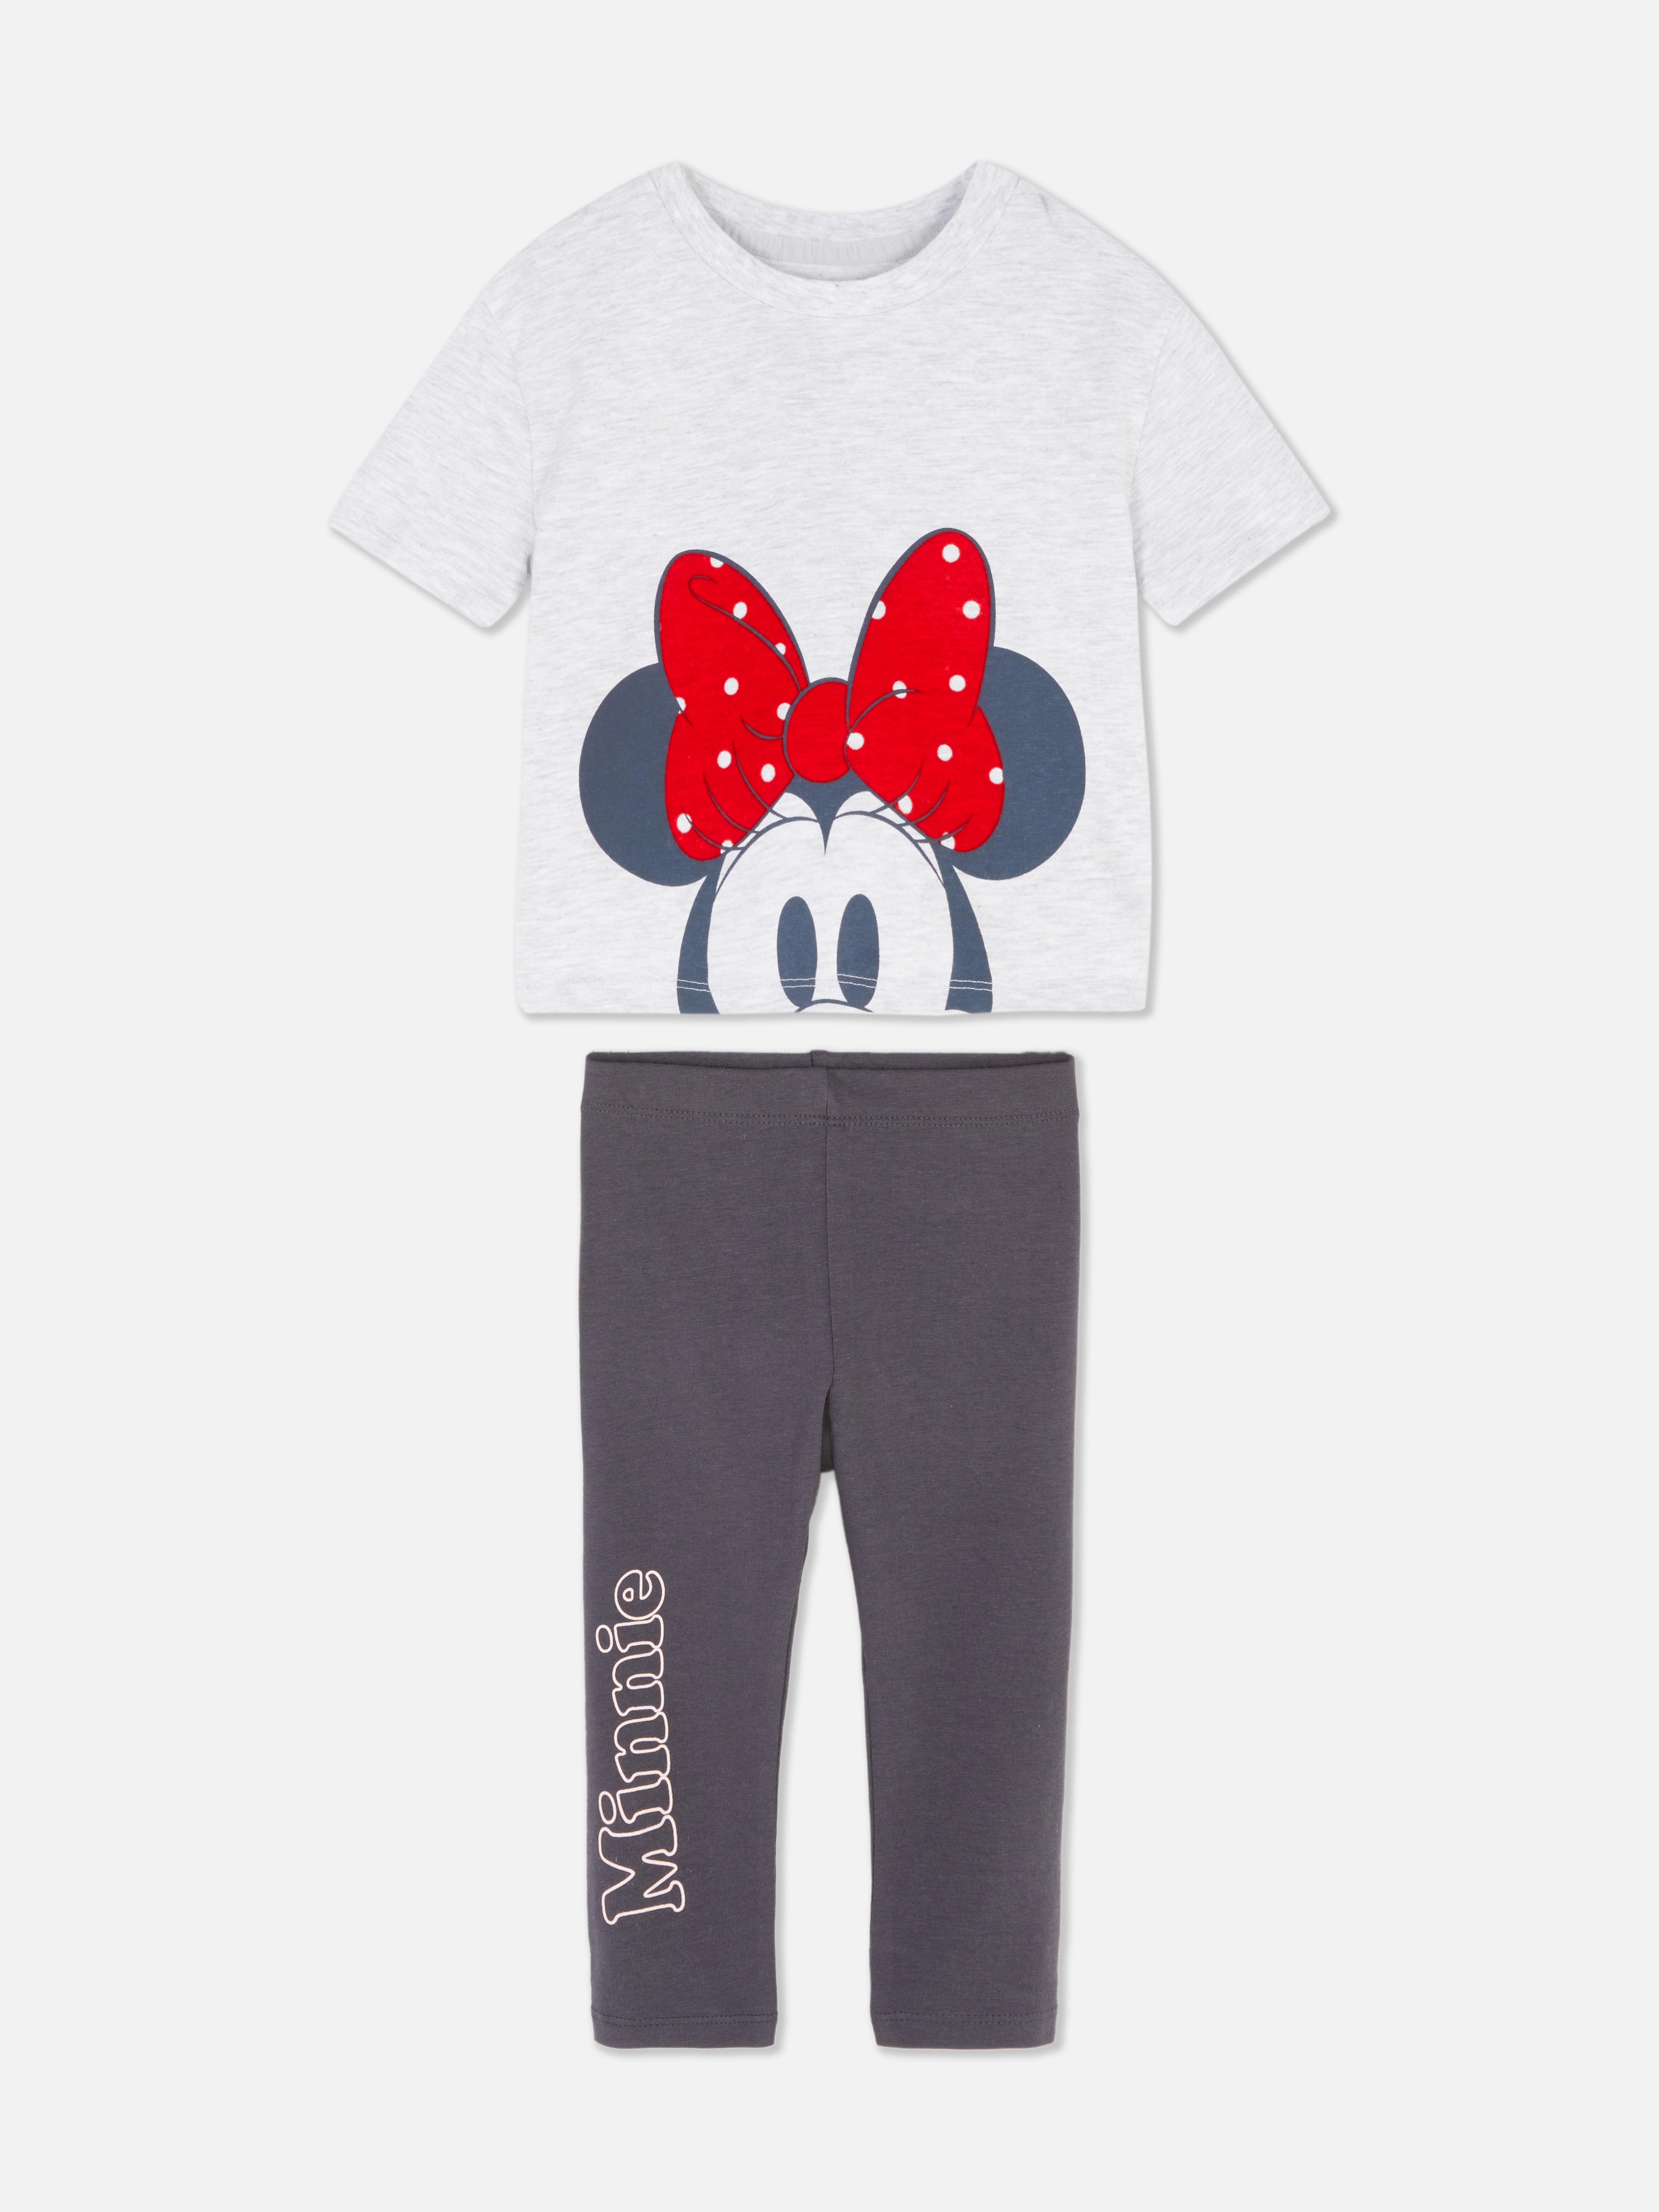 Disney’s Minnie Mouse T-Shirt and Leggings Set